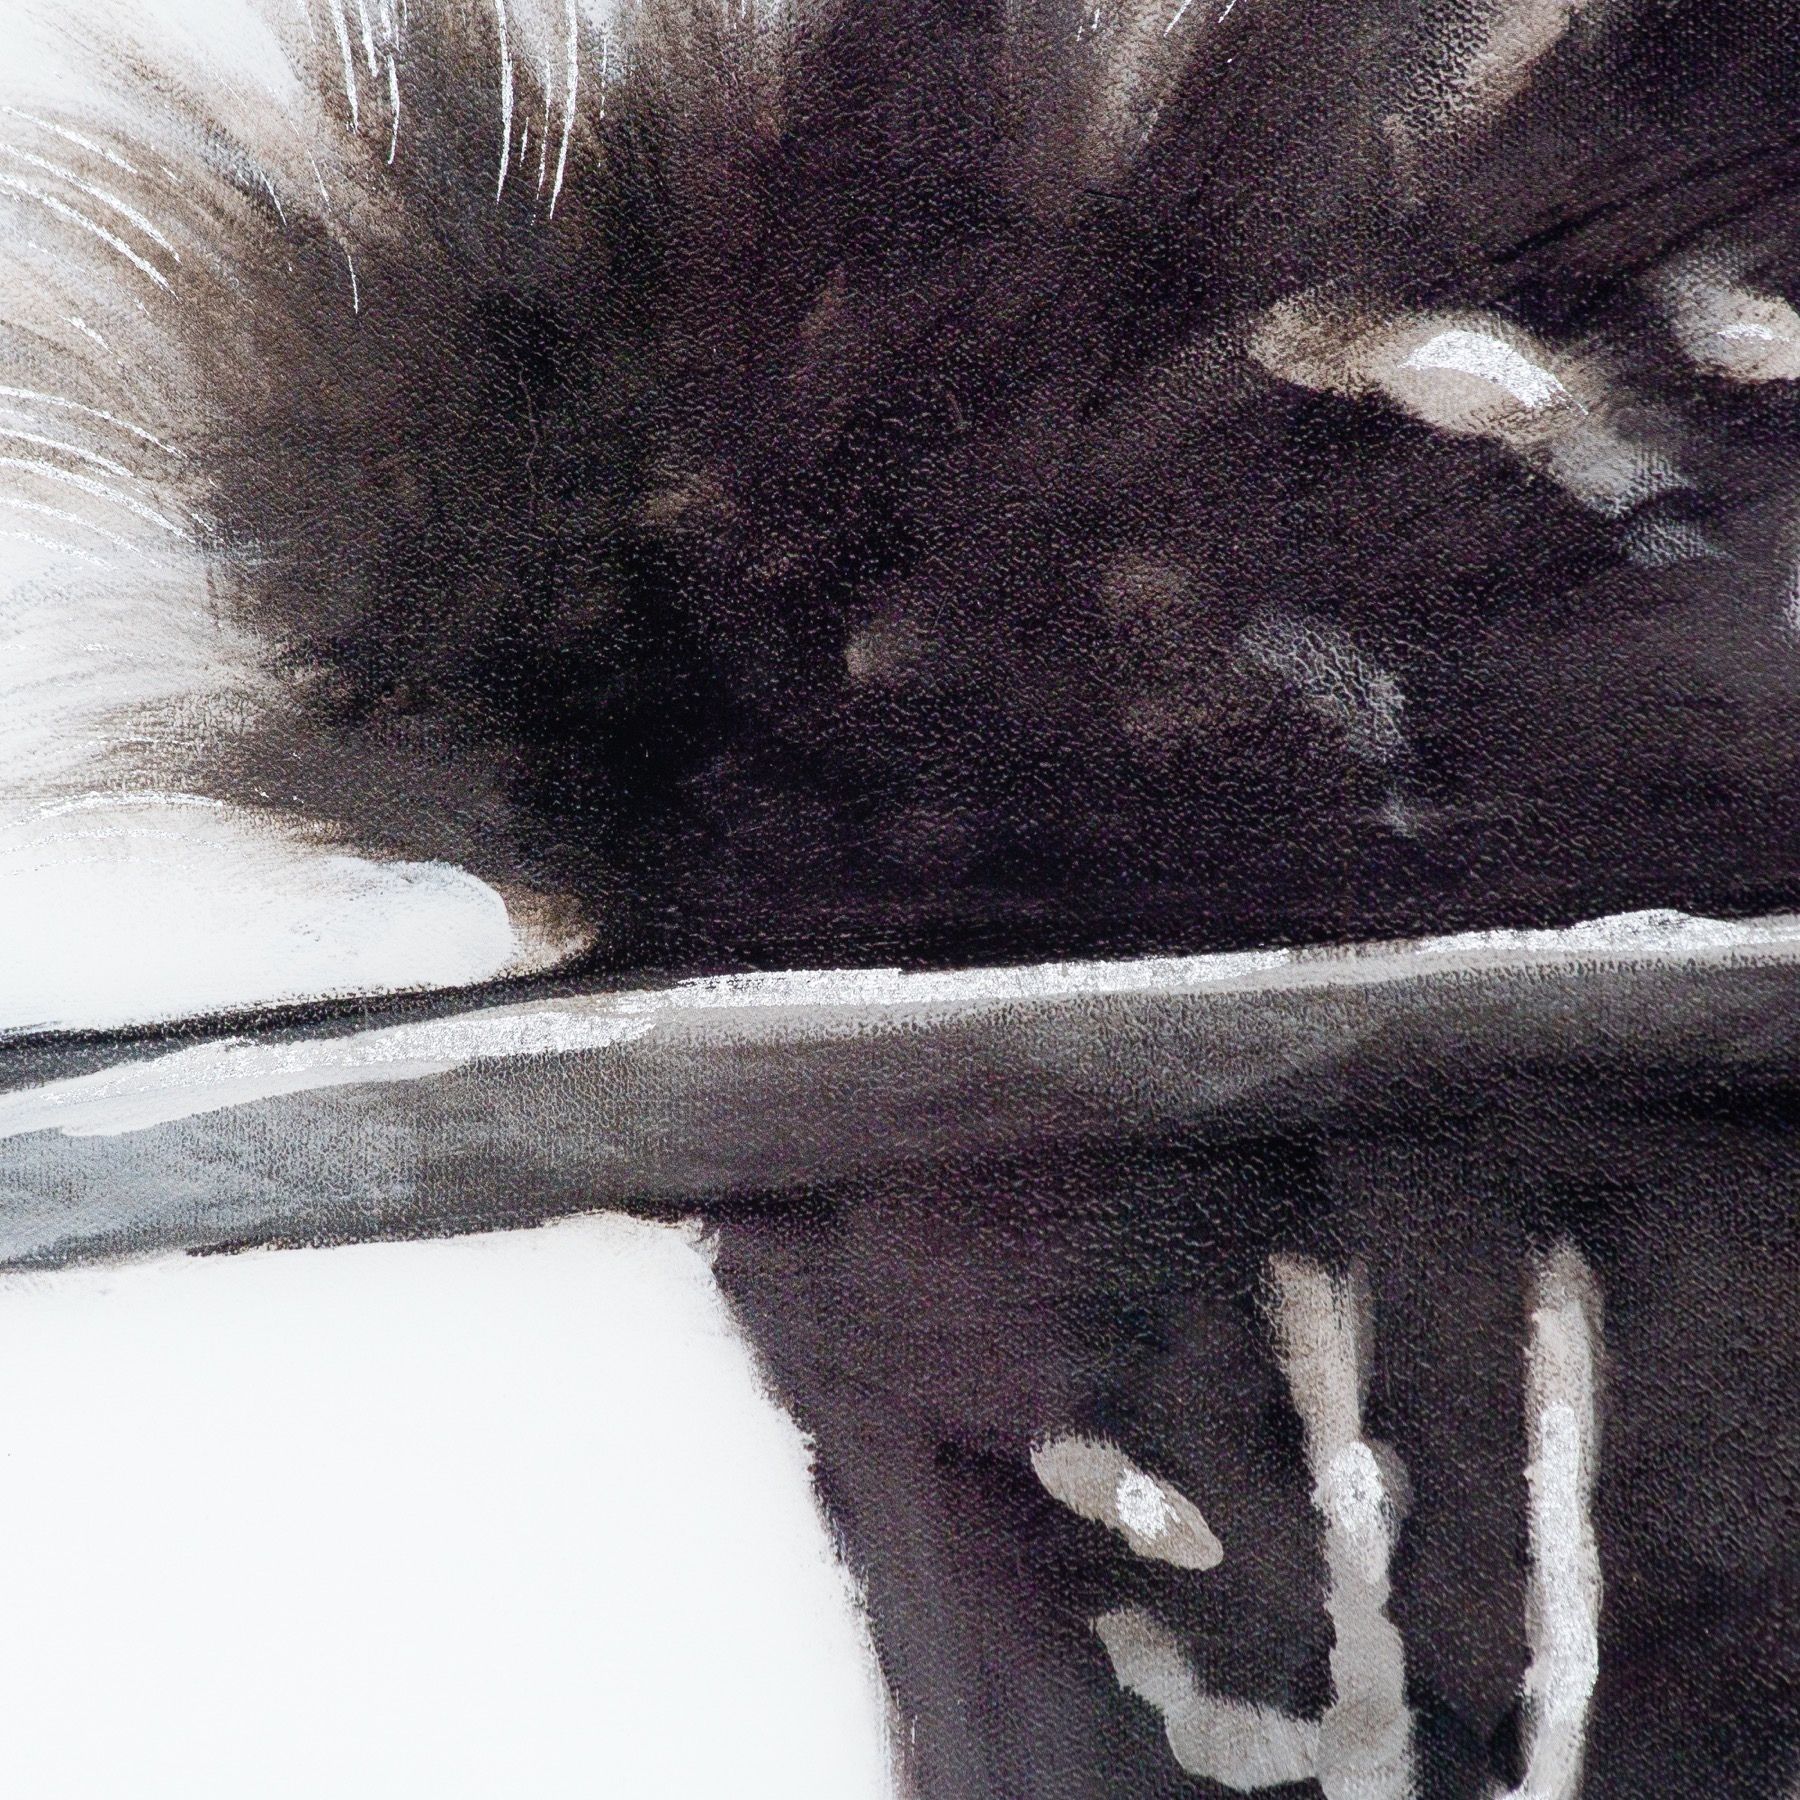 Black Feather With White Spots Over 3 Black Glass Frames - Image 6